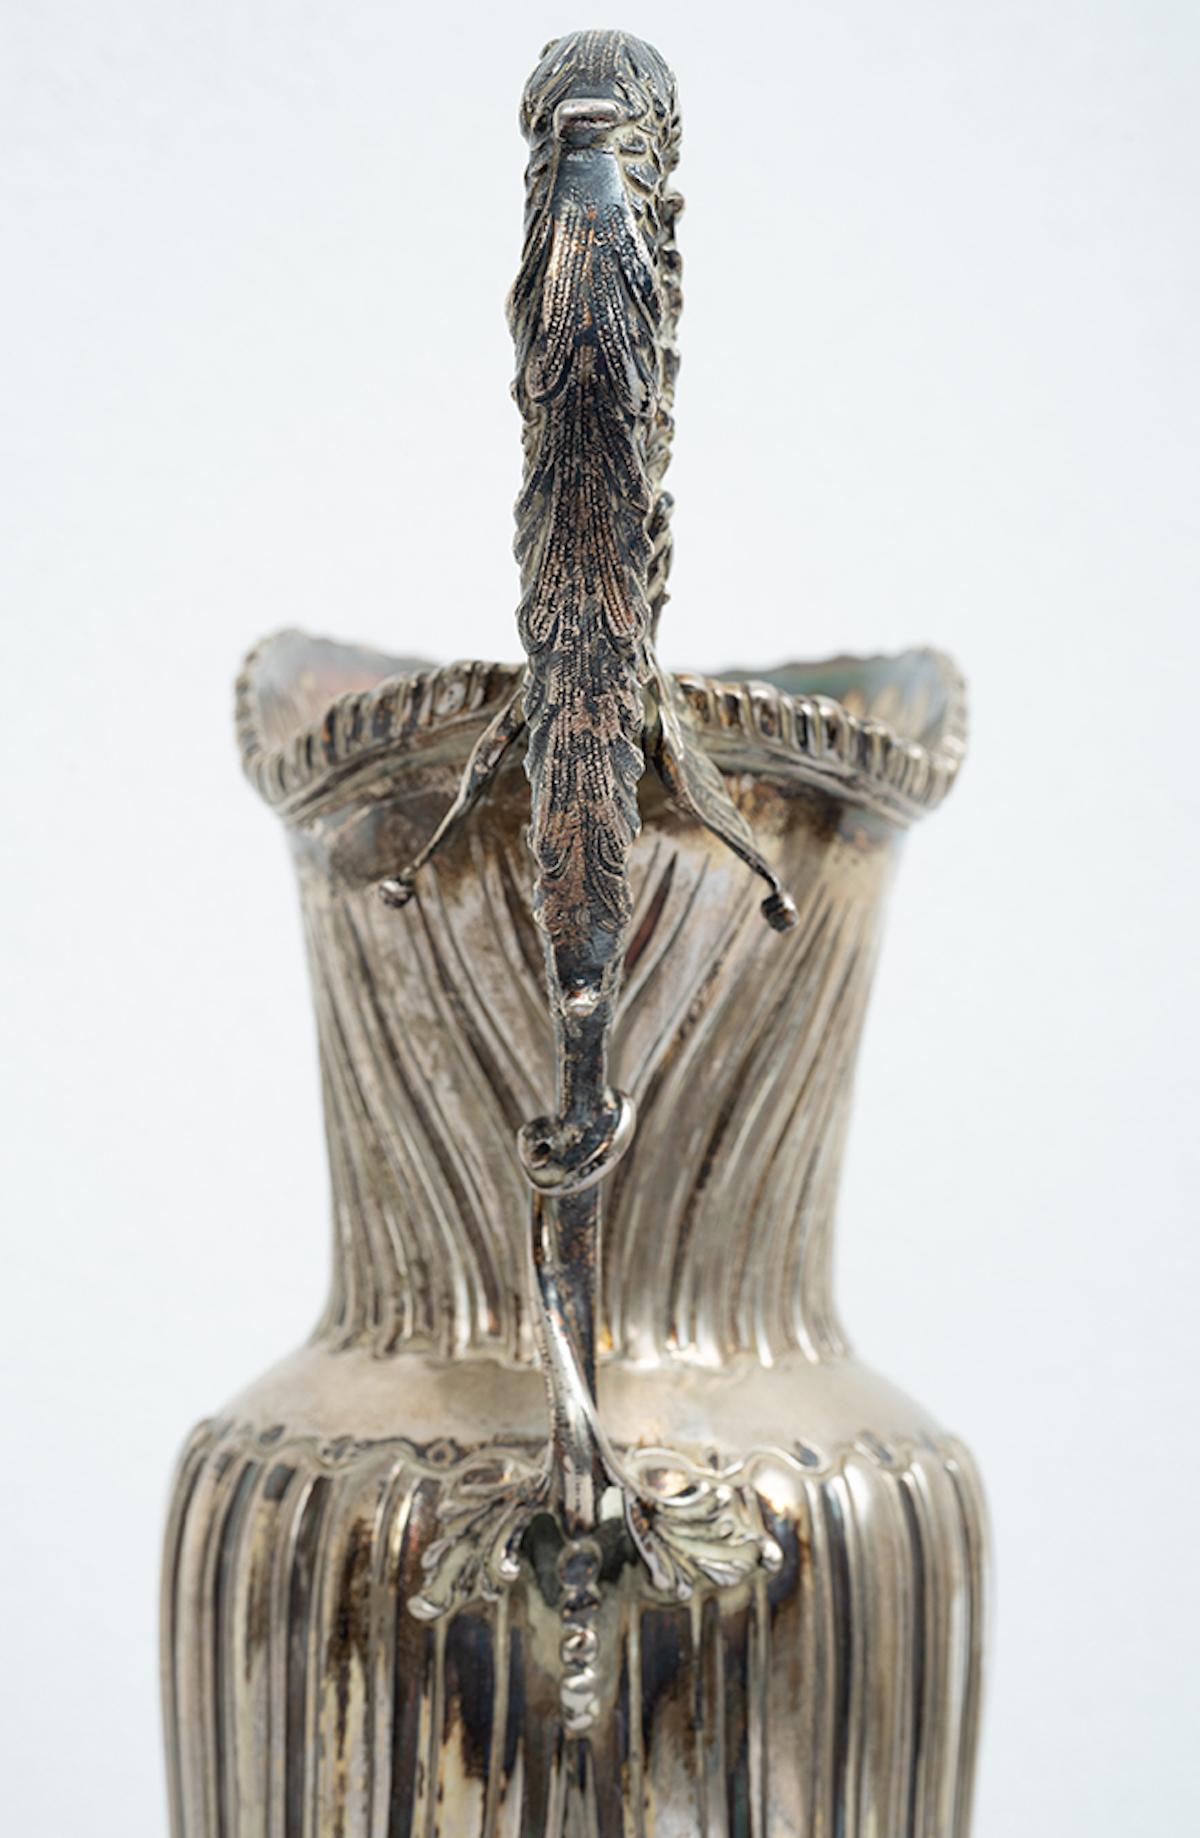 Antique Neapolitan silver pourer belonging to the early 20th century.

The central sinusoidal-shaped body is embellished with a pod interspersed with a winged dolphin-shaped handle.

The base is oval in shape embellished with dense chiseling on the